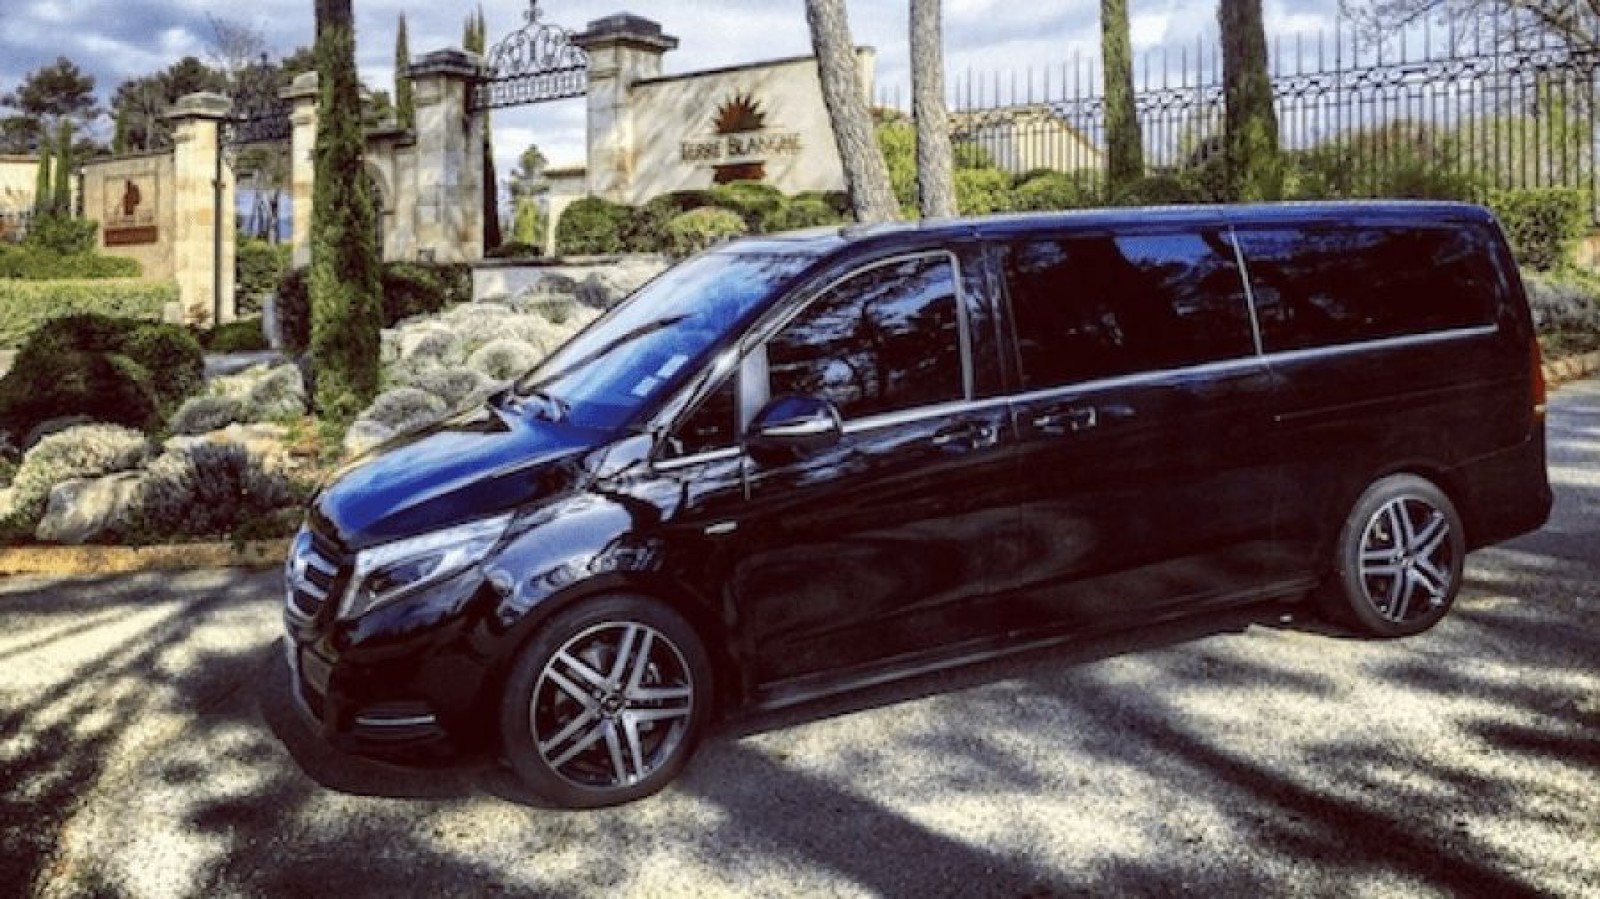 Transfert Nice Airport - Book your transfer 24/7 - Ruby Services - Book Your Transfer From Nice Airport With Private Chauffeur. 